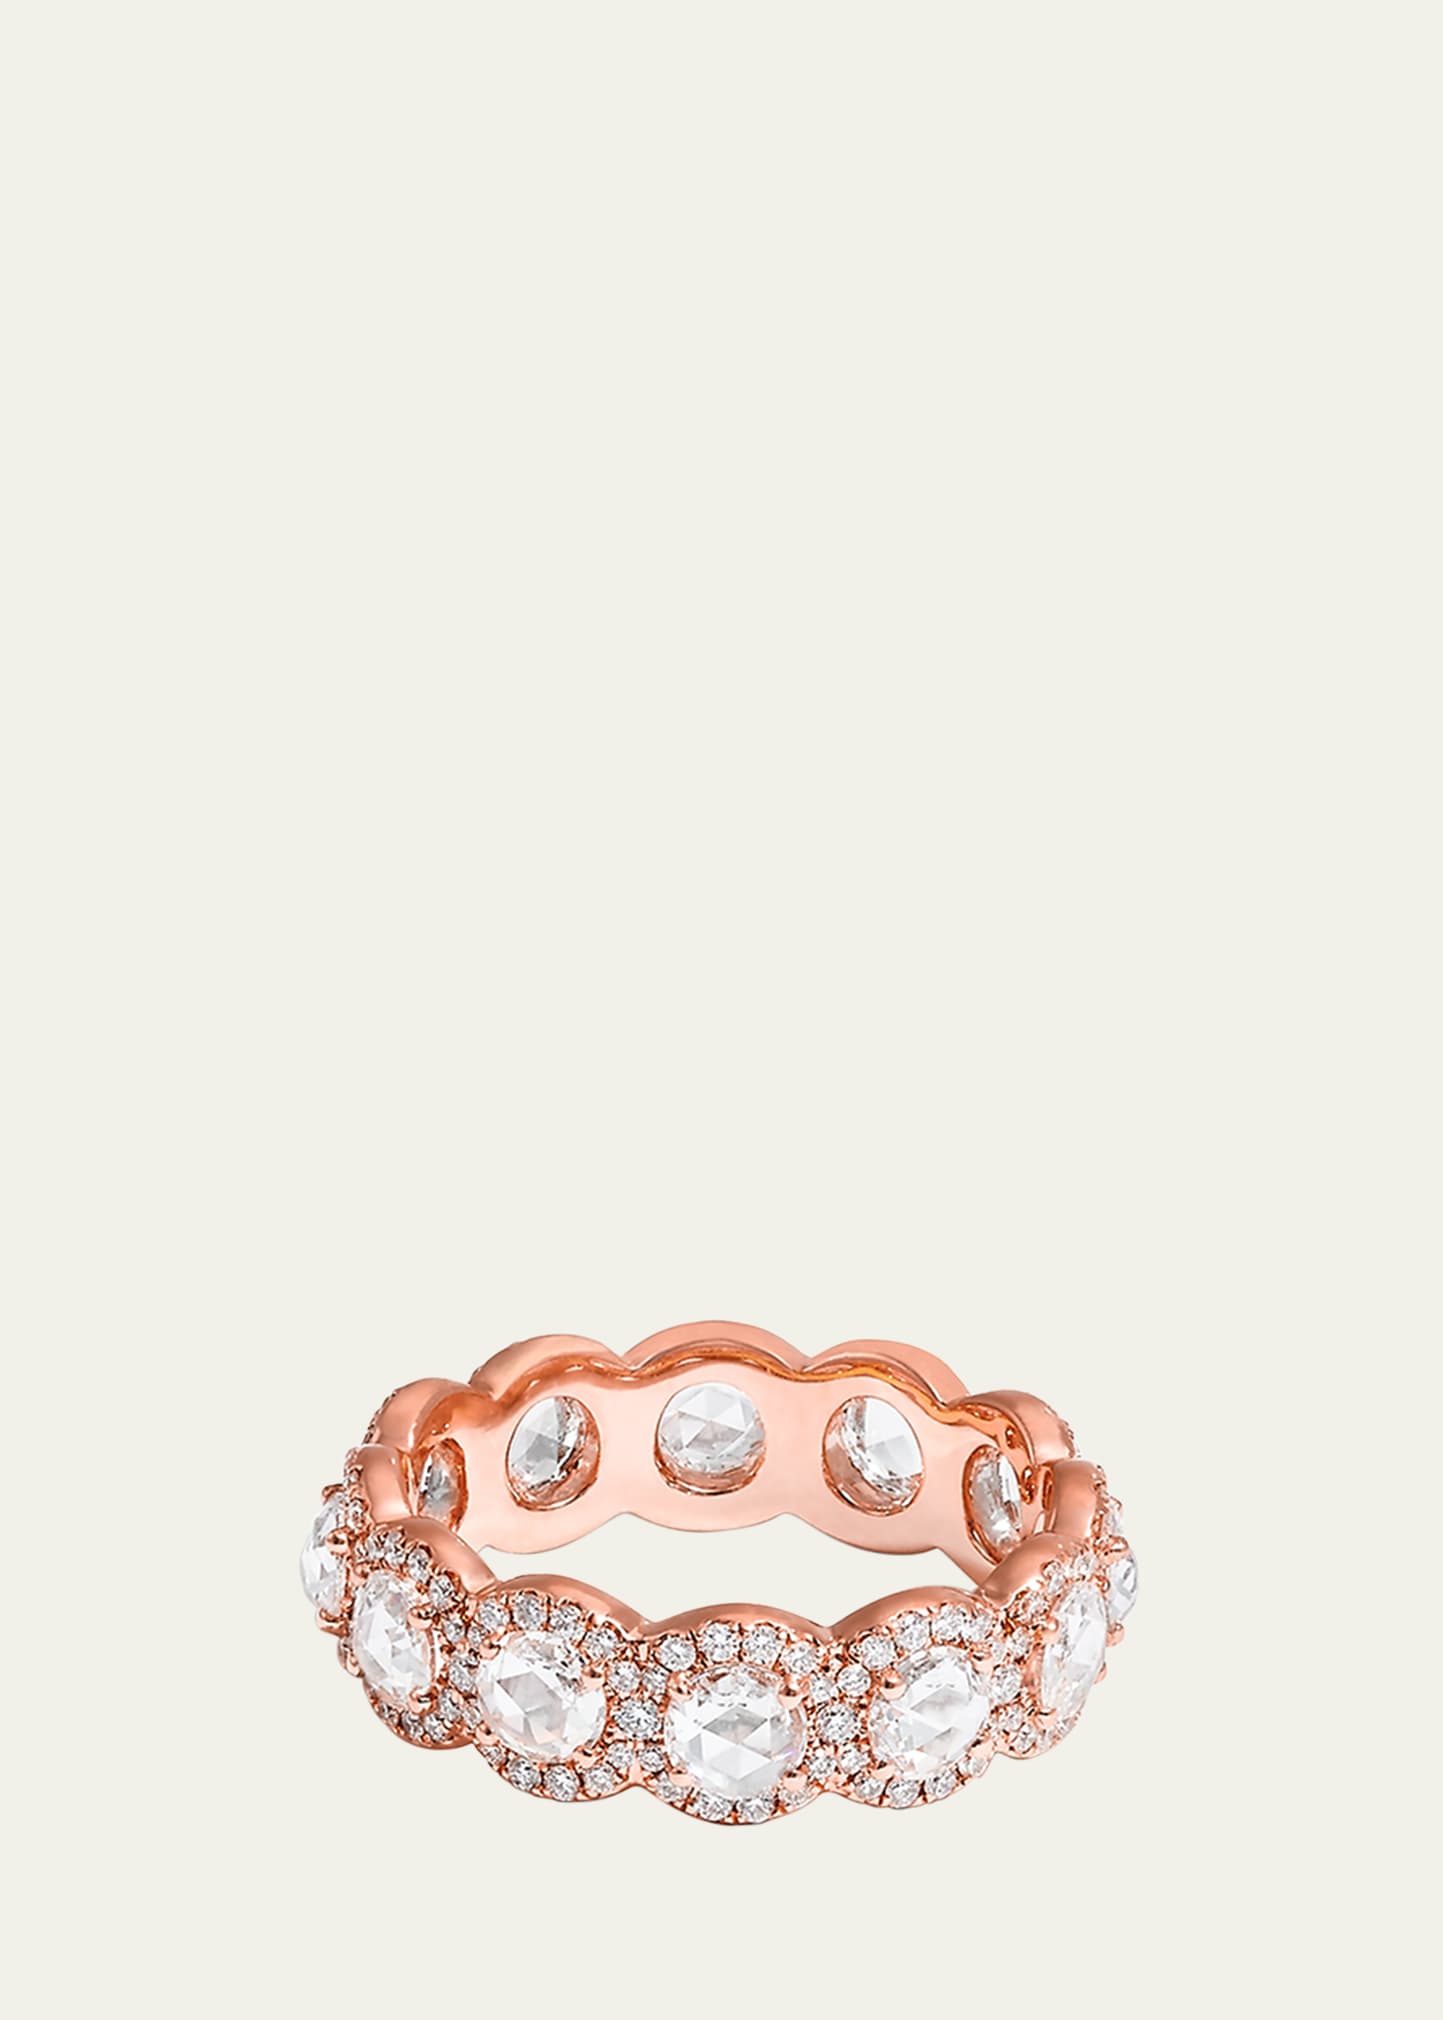 64 FACETS 18K ROSE GOLD SCALLOP DIAMOND ETERNITY BAND